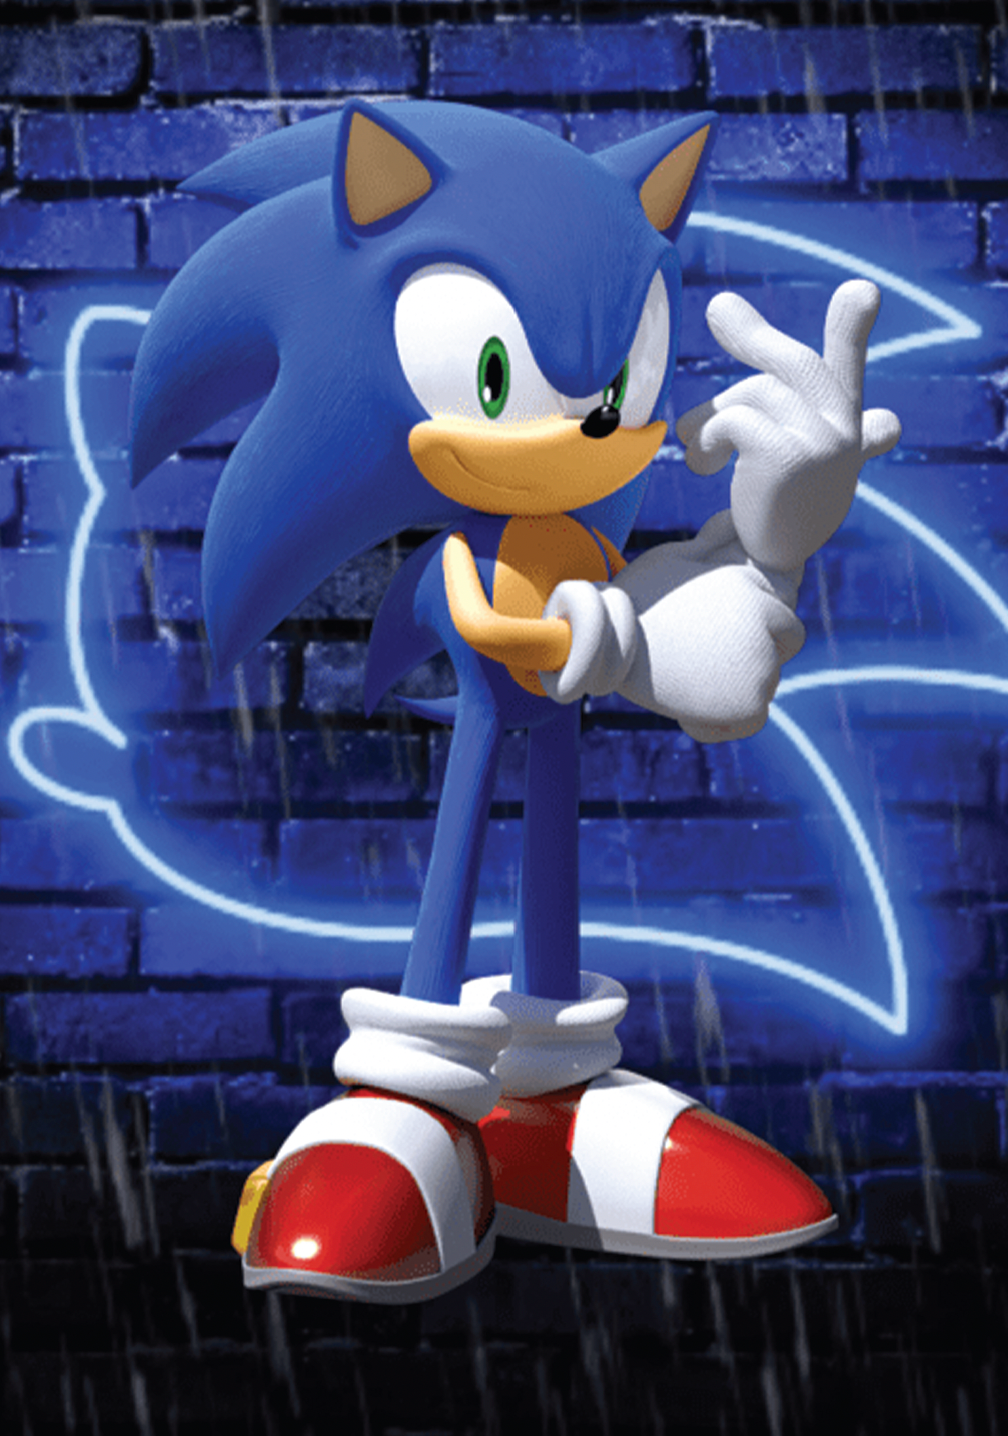 Sonic the hedgehog poster